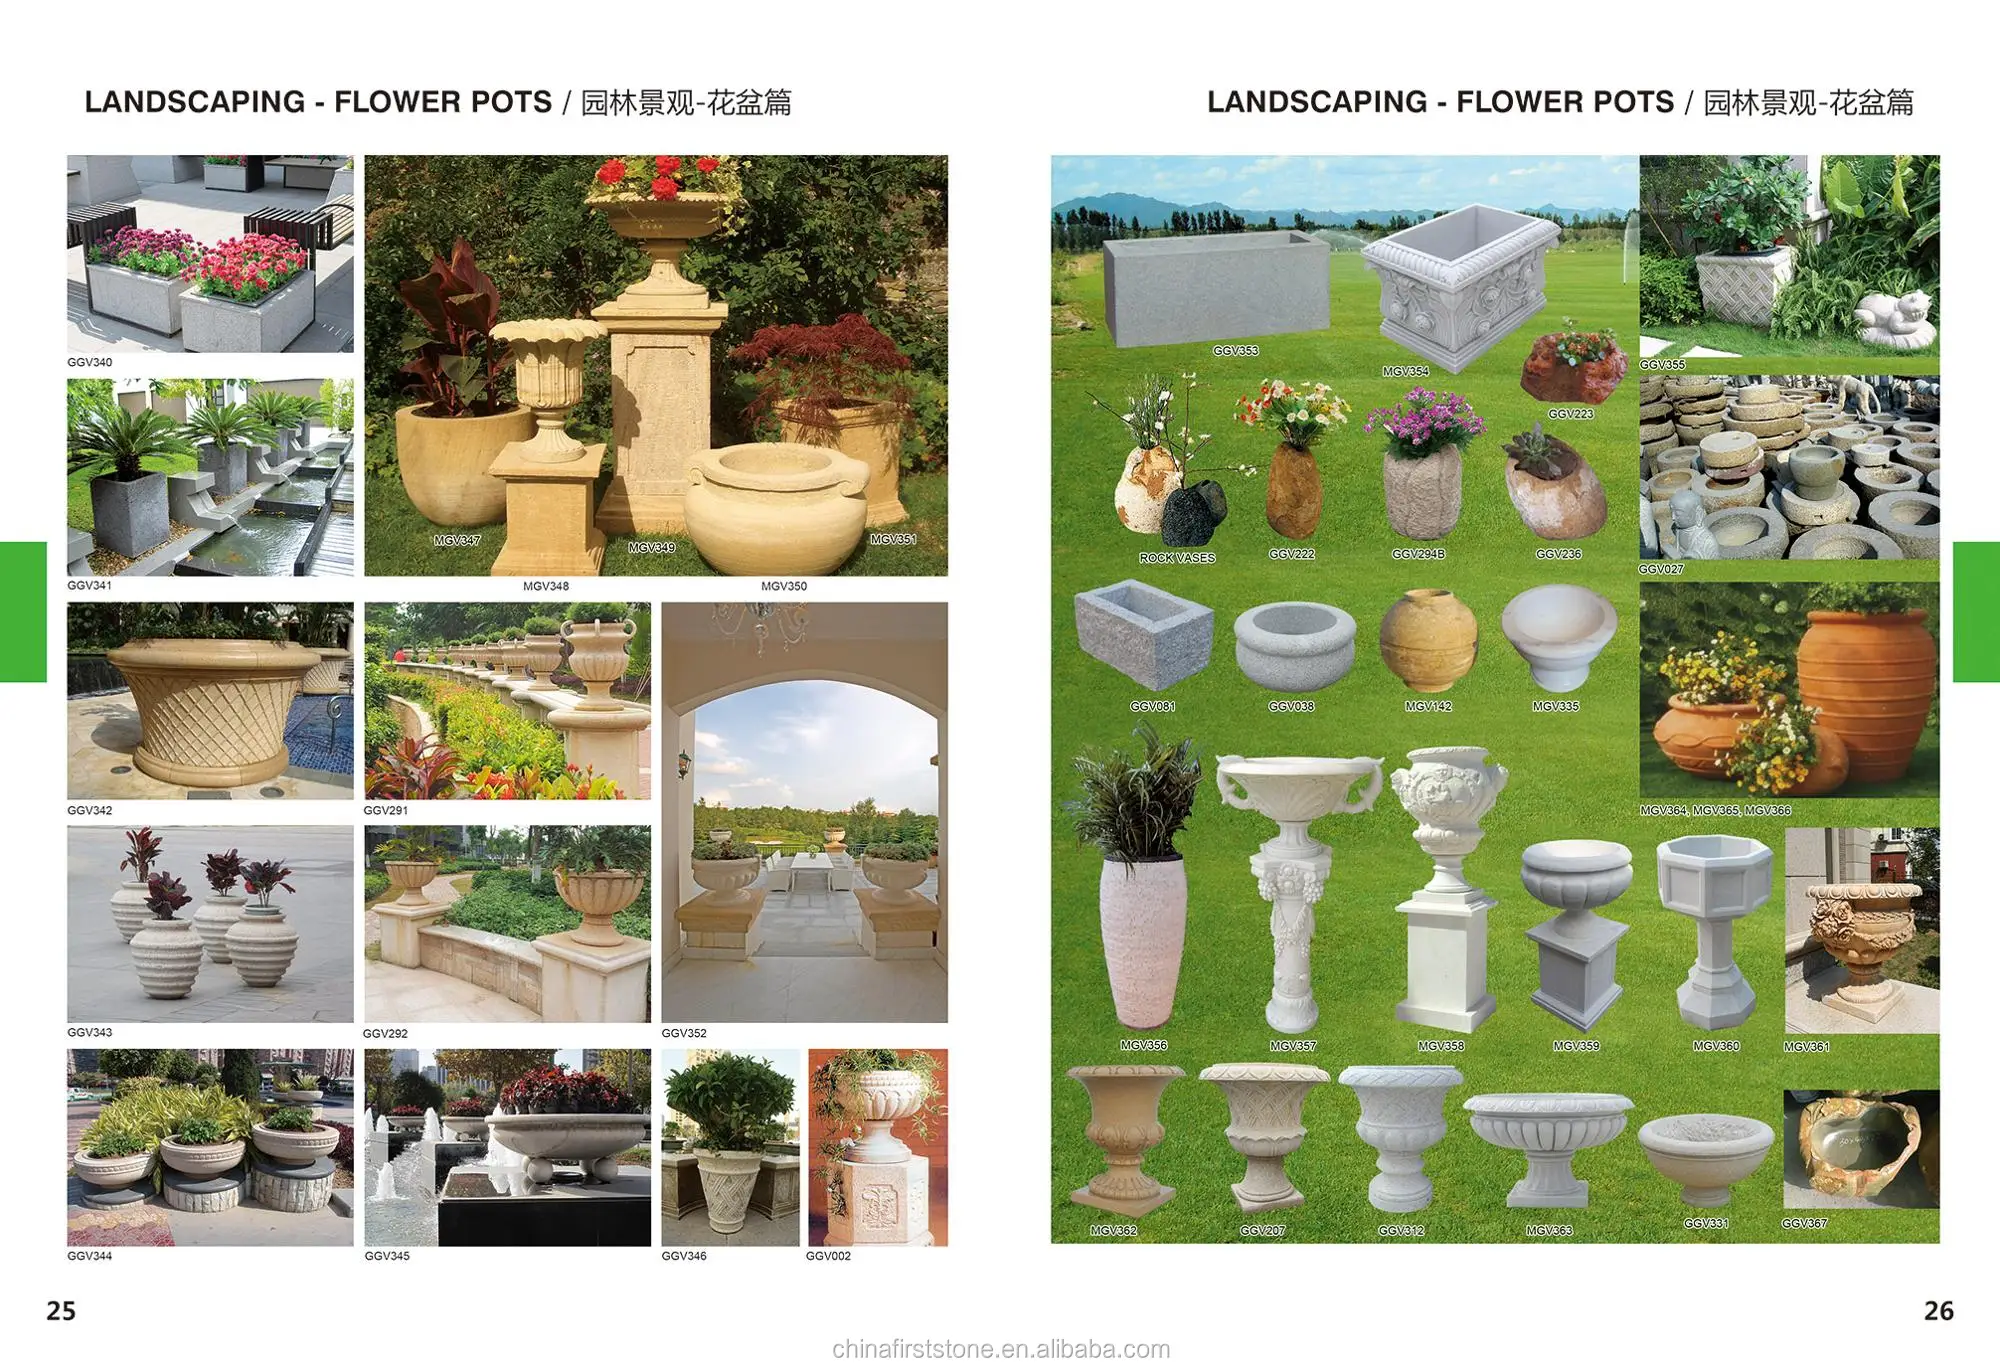 China Cheap Wholesale White Grey Granite Stone Carved Big Cup Shape Flower Pot With Stand